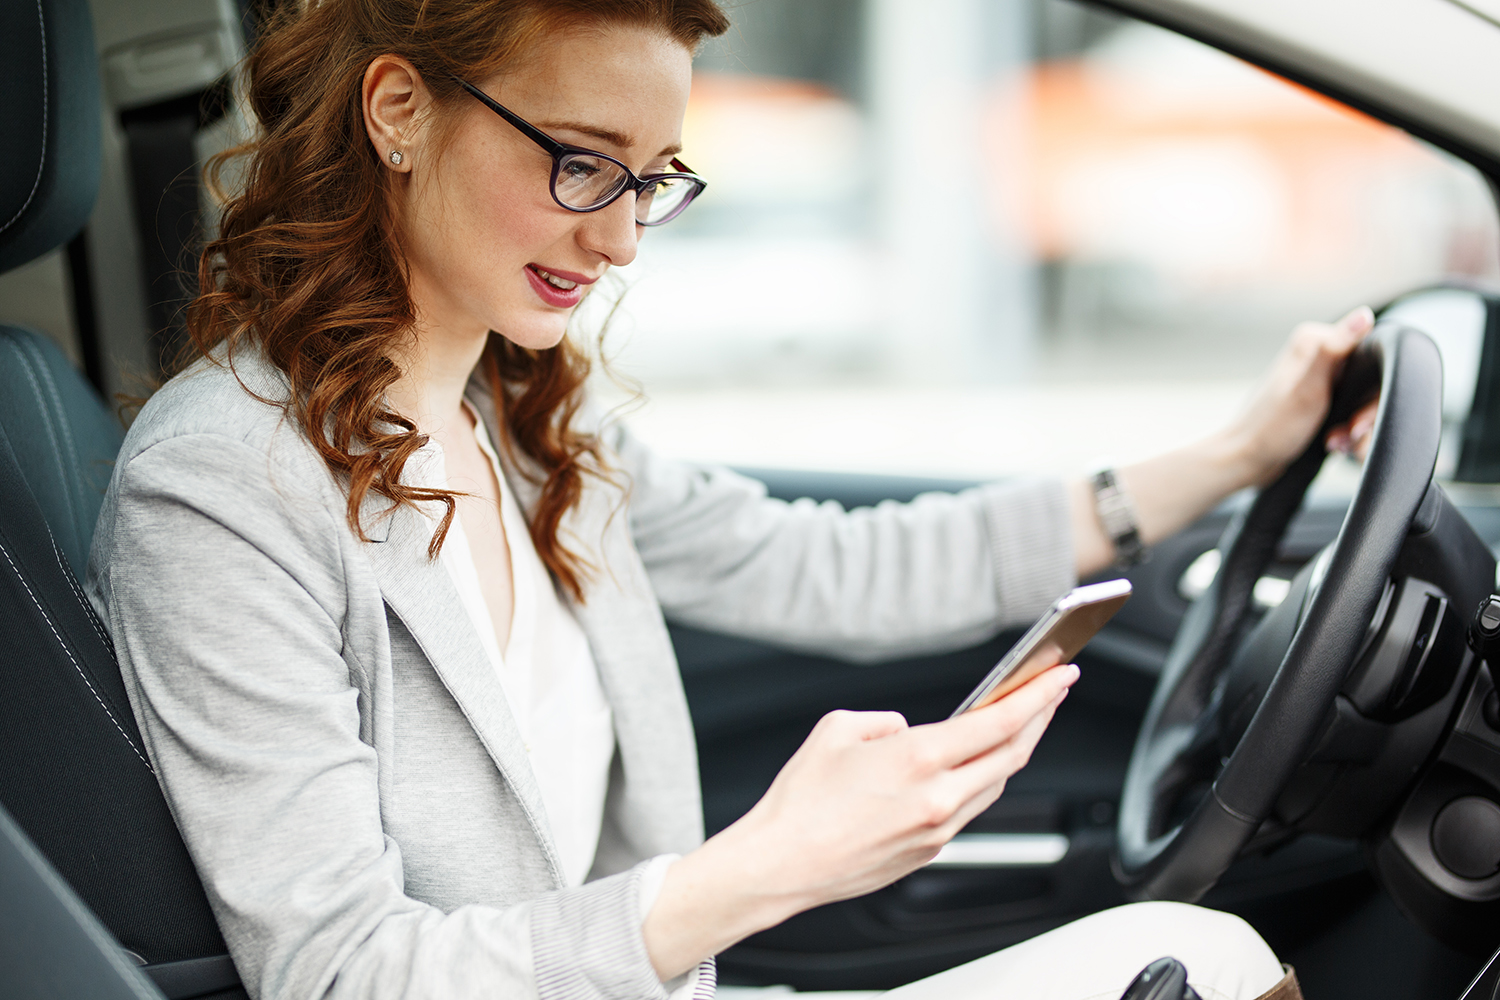 Woman wearing glasses looking down at her phone while driving